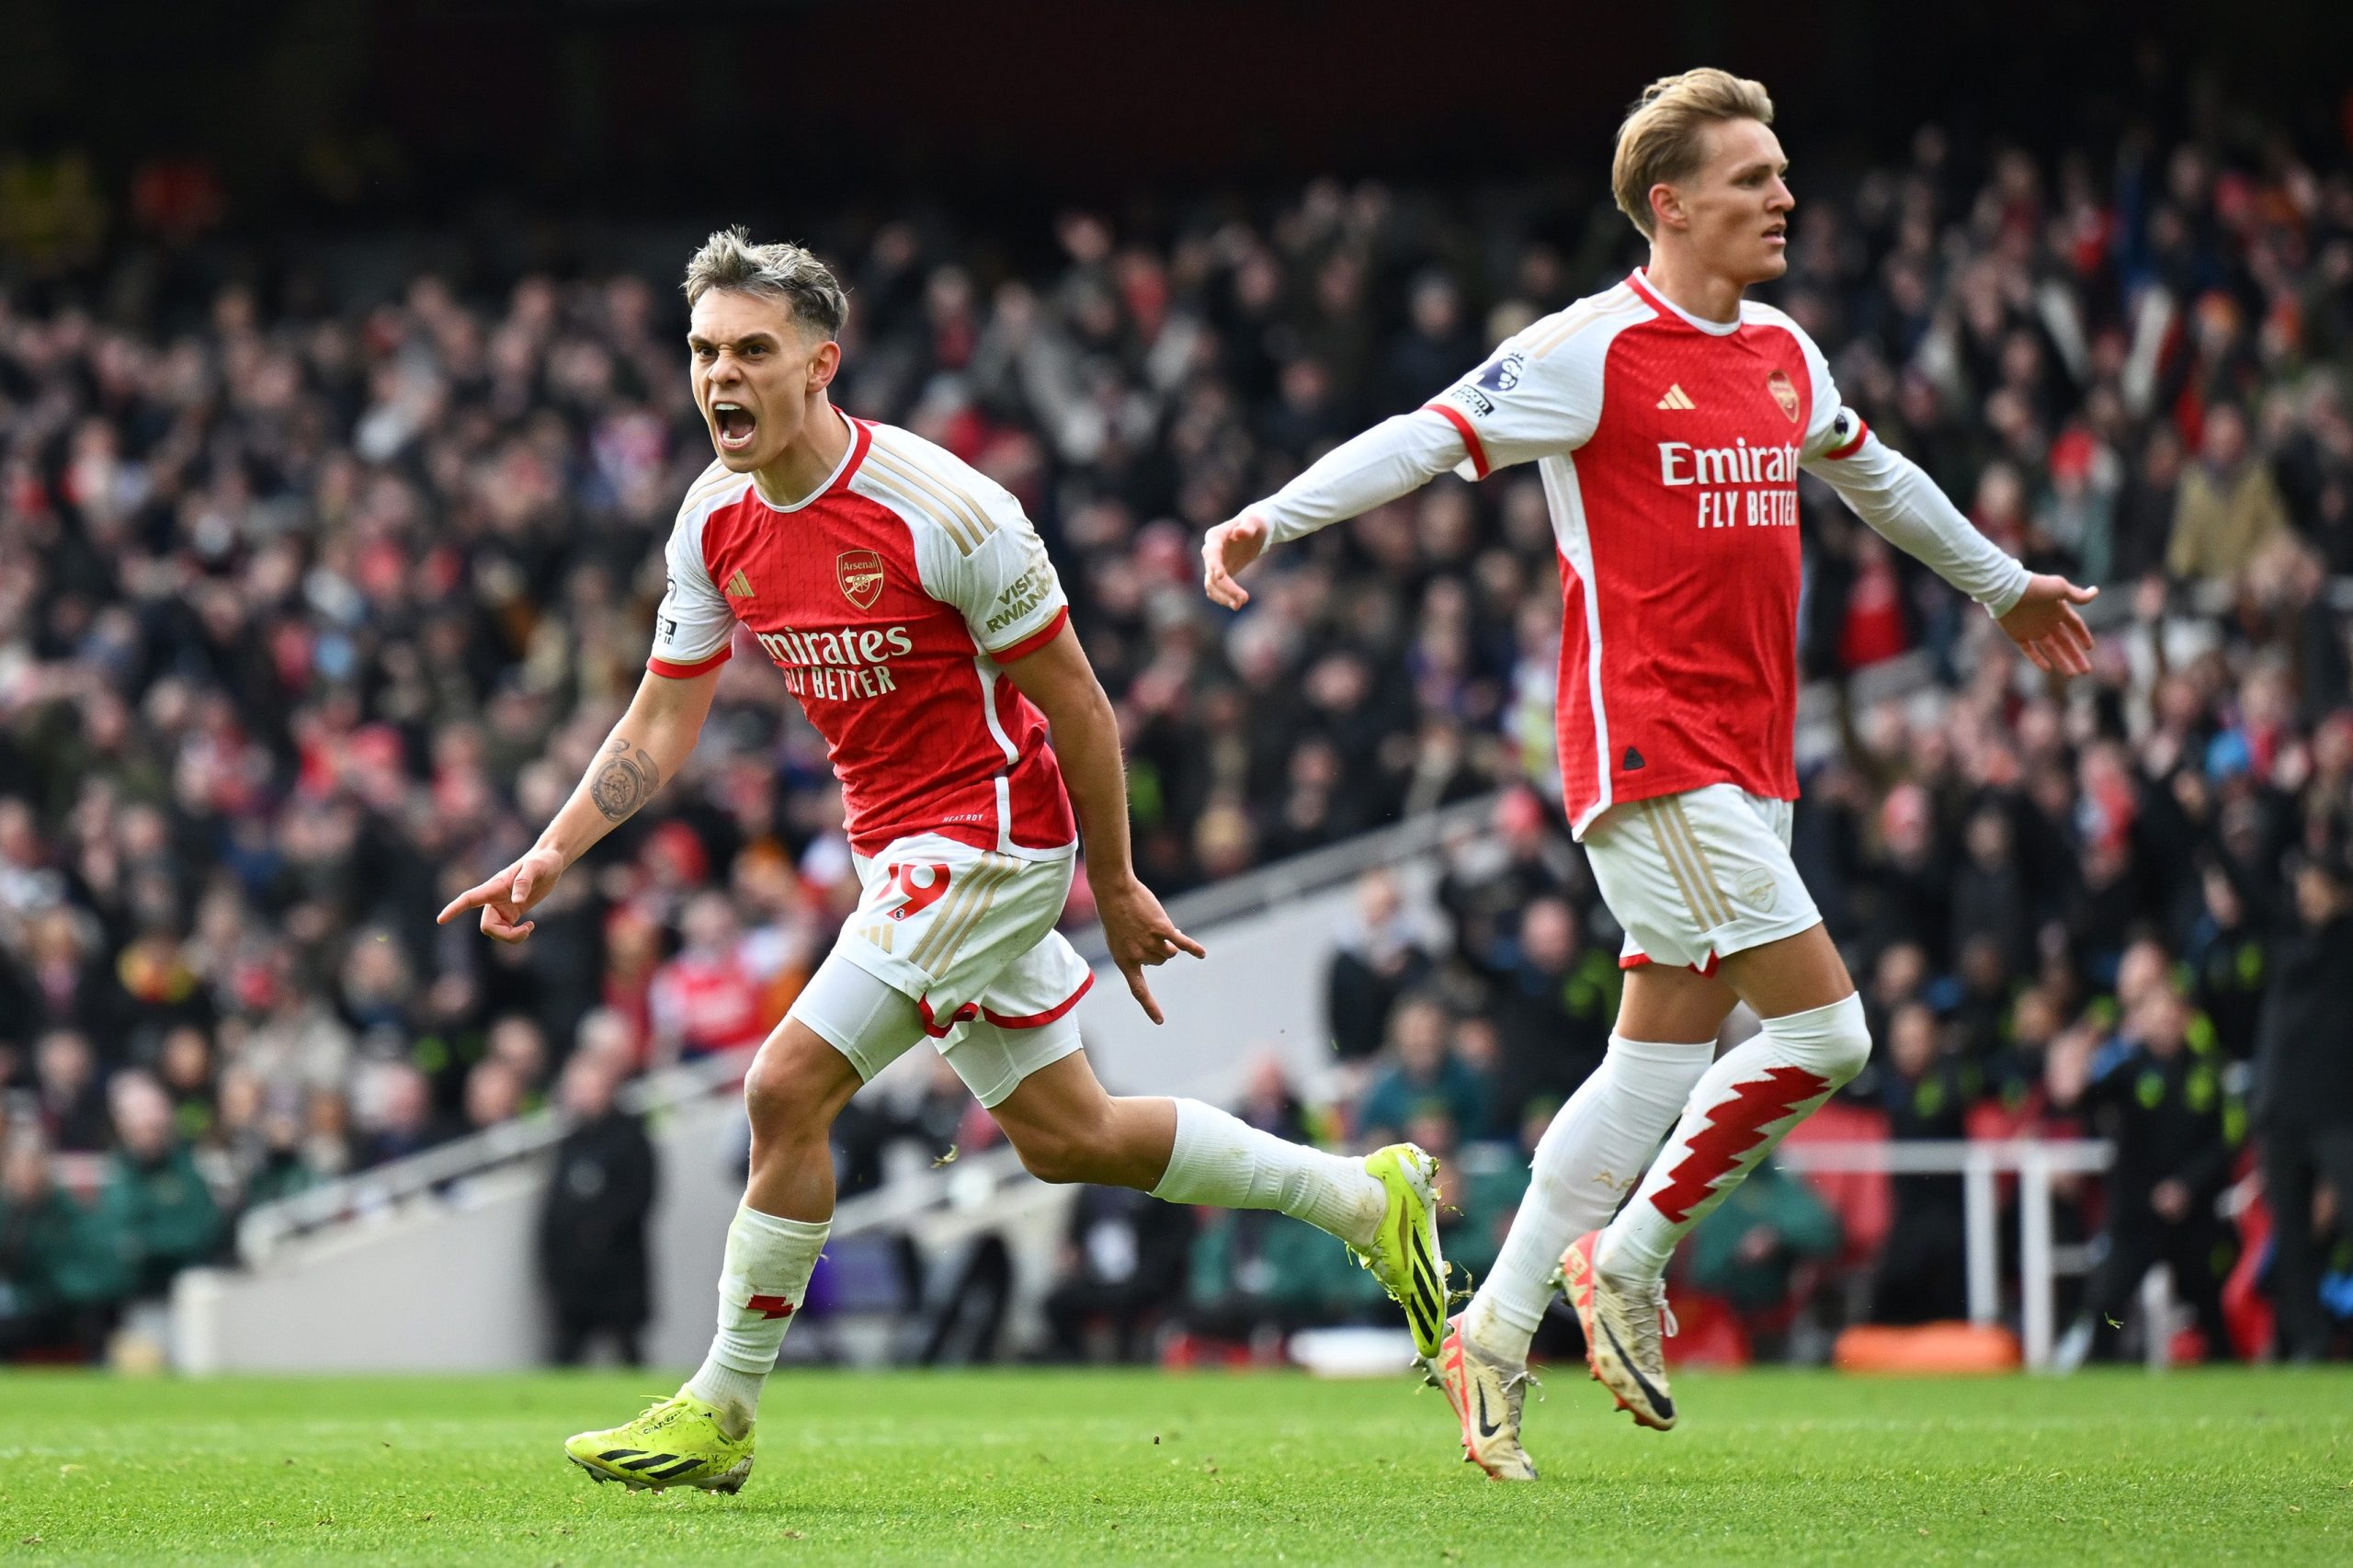 "We will try" -- Arsenal boss on the way forward